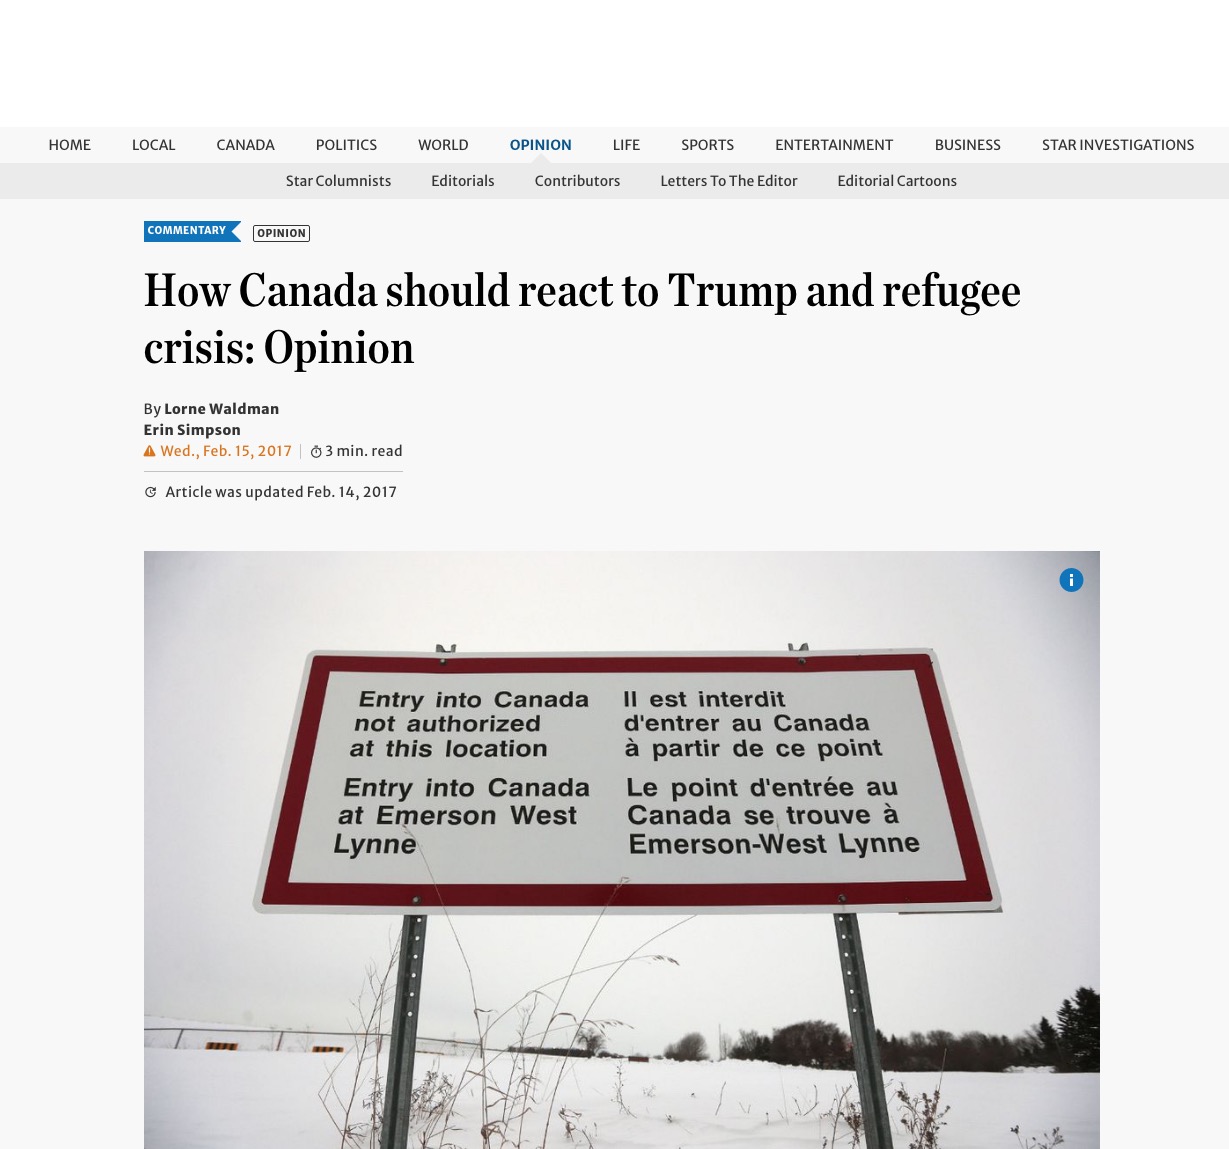 Erin Smpson – How Canada should react to Trump and refugee crisis